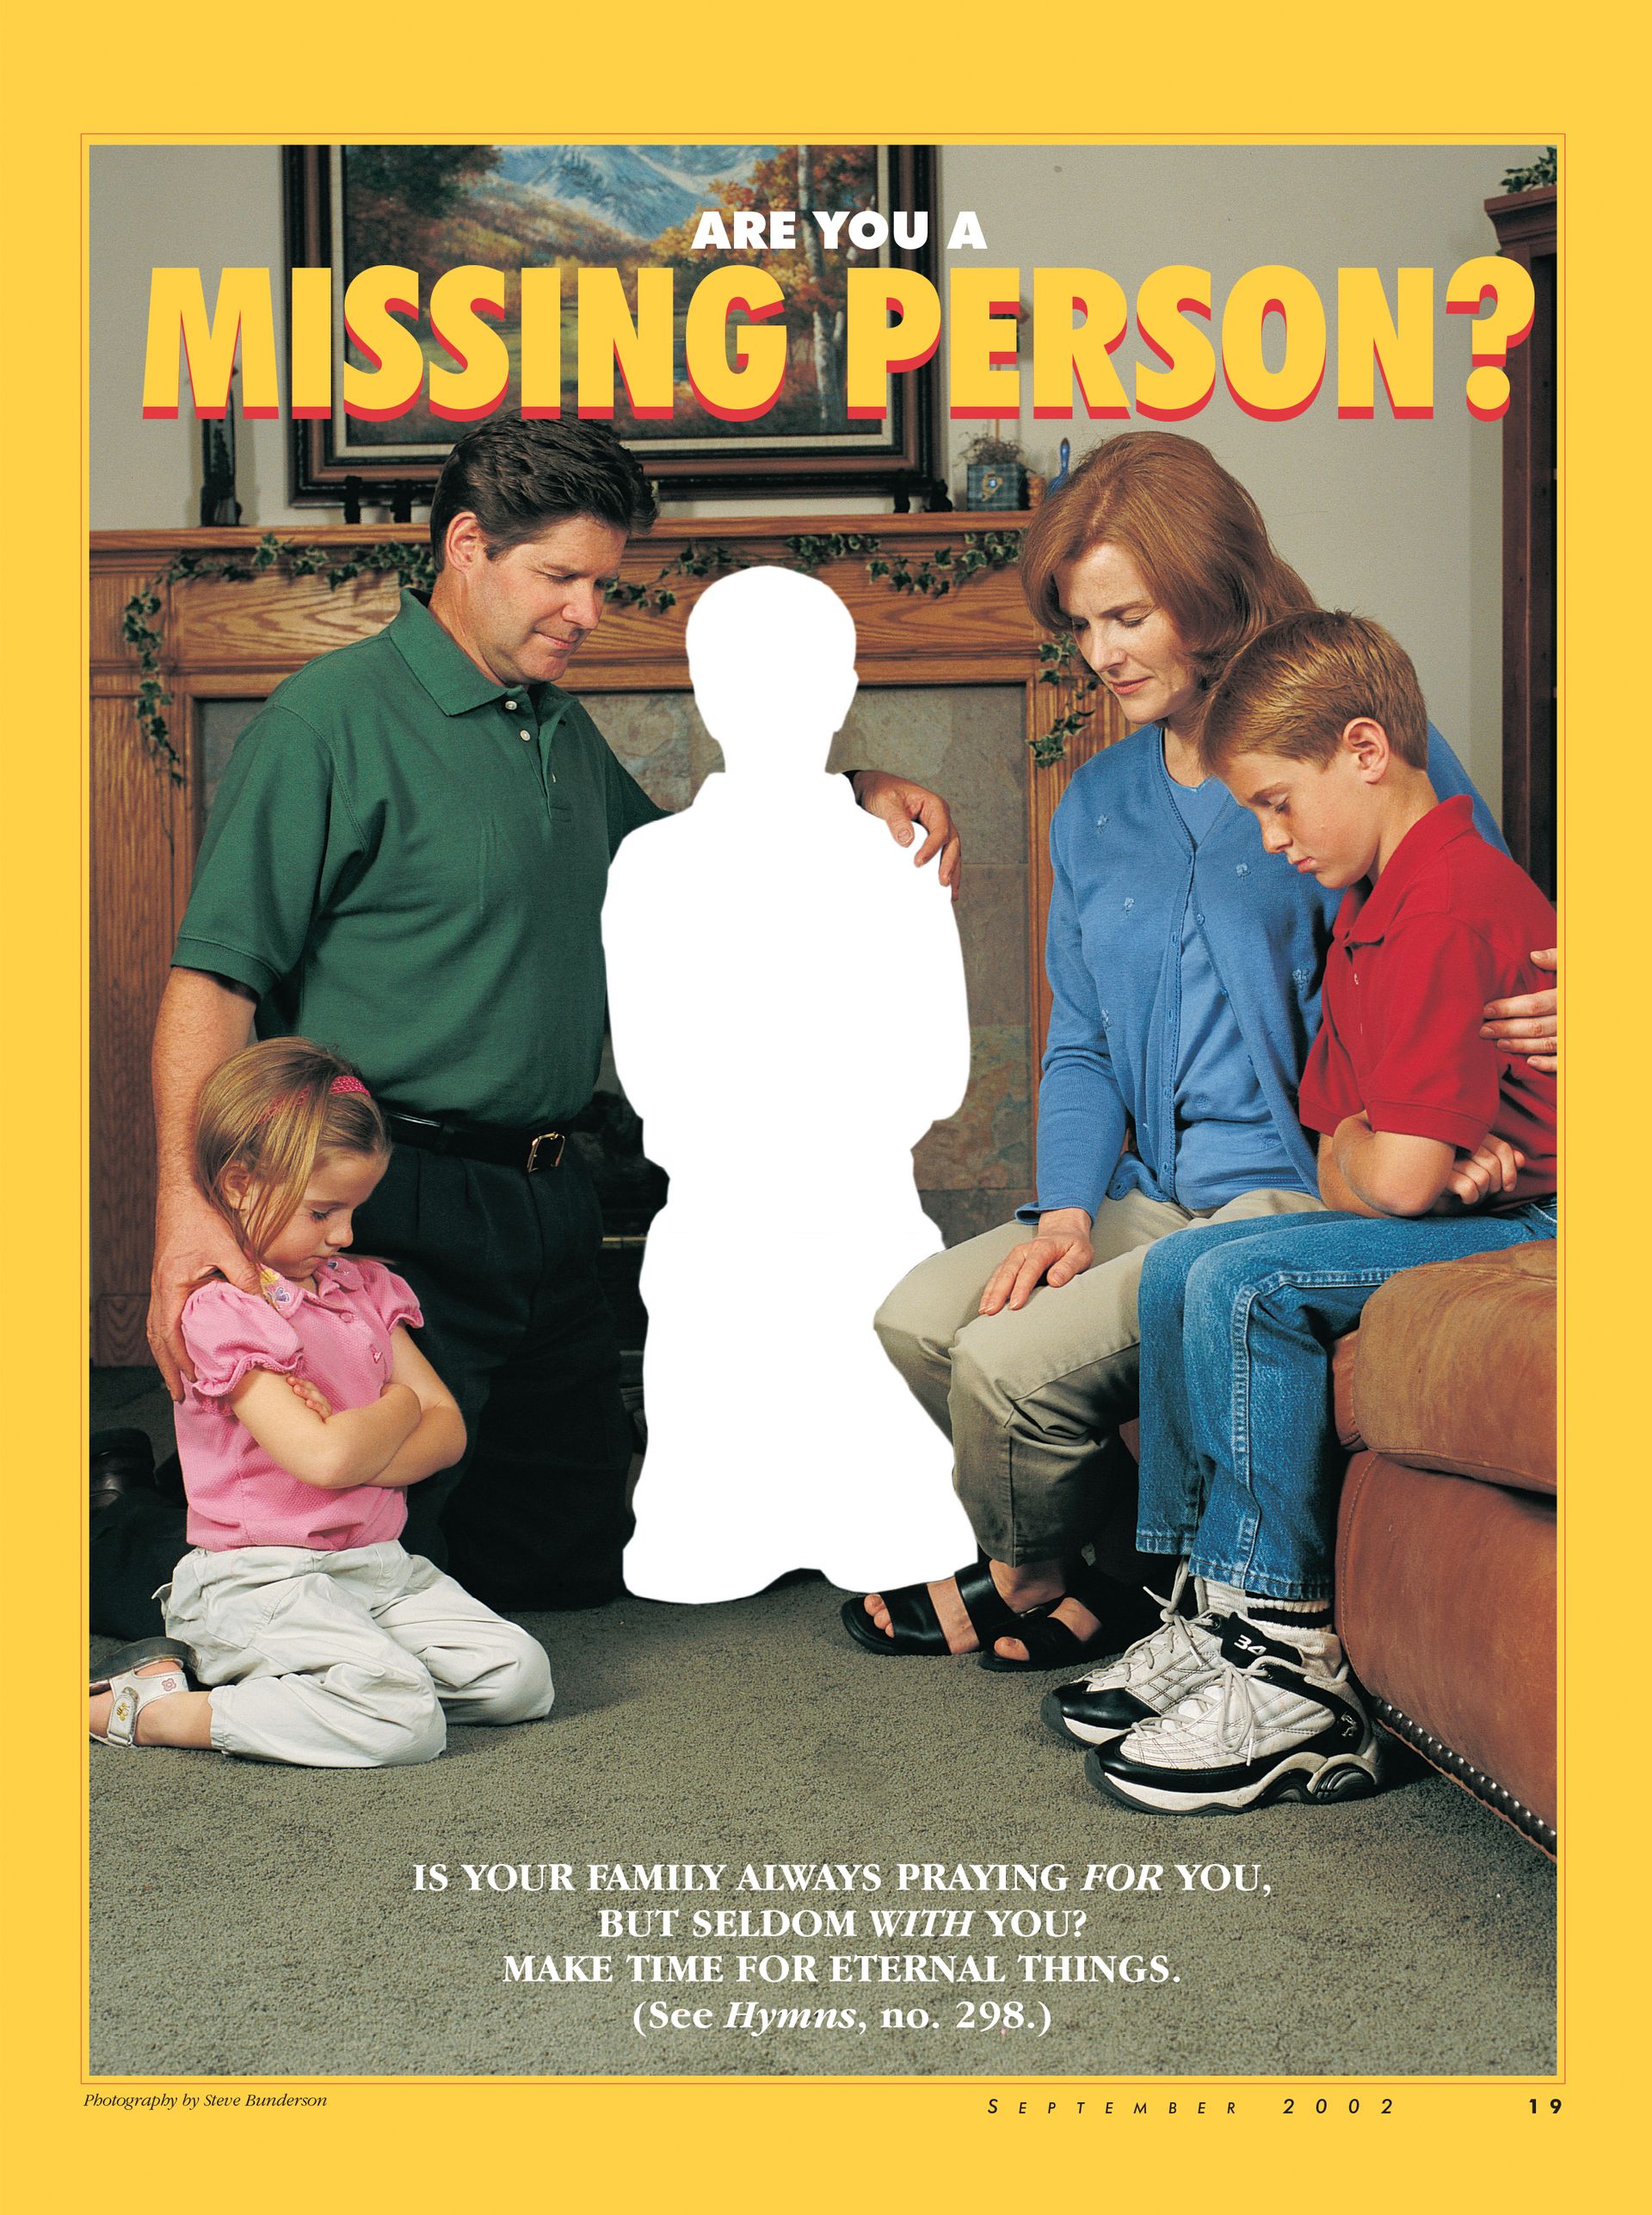 Are You a Missing Person? Is your family always praying for you, but seldom with you? Make time for eternal things. (See Hymns, no. 298.) Sept. 2002 © undefined ipCode 1.